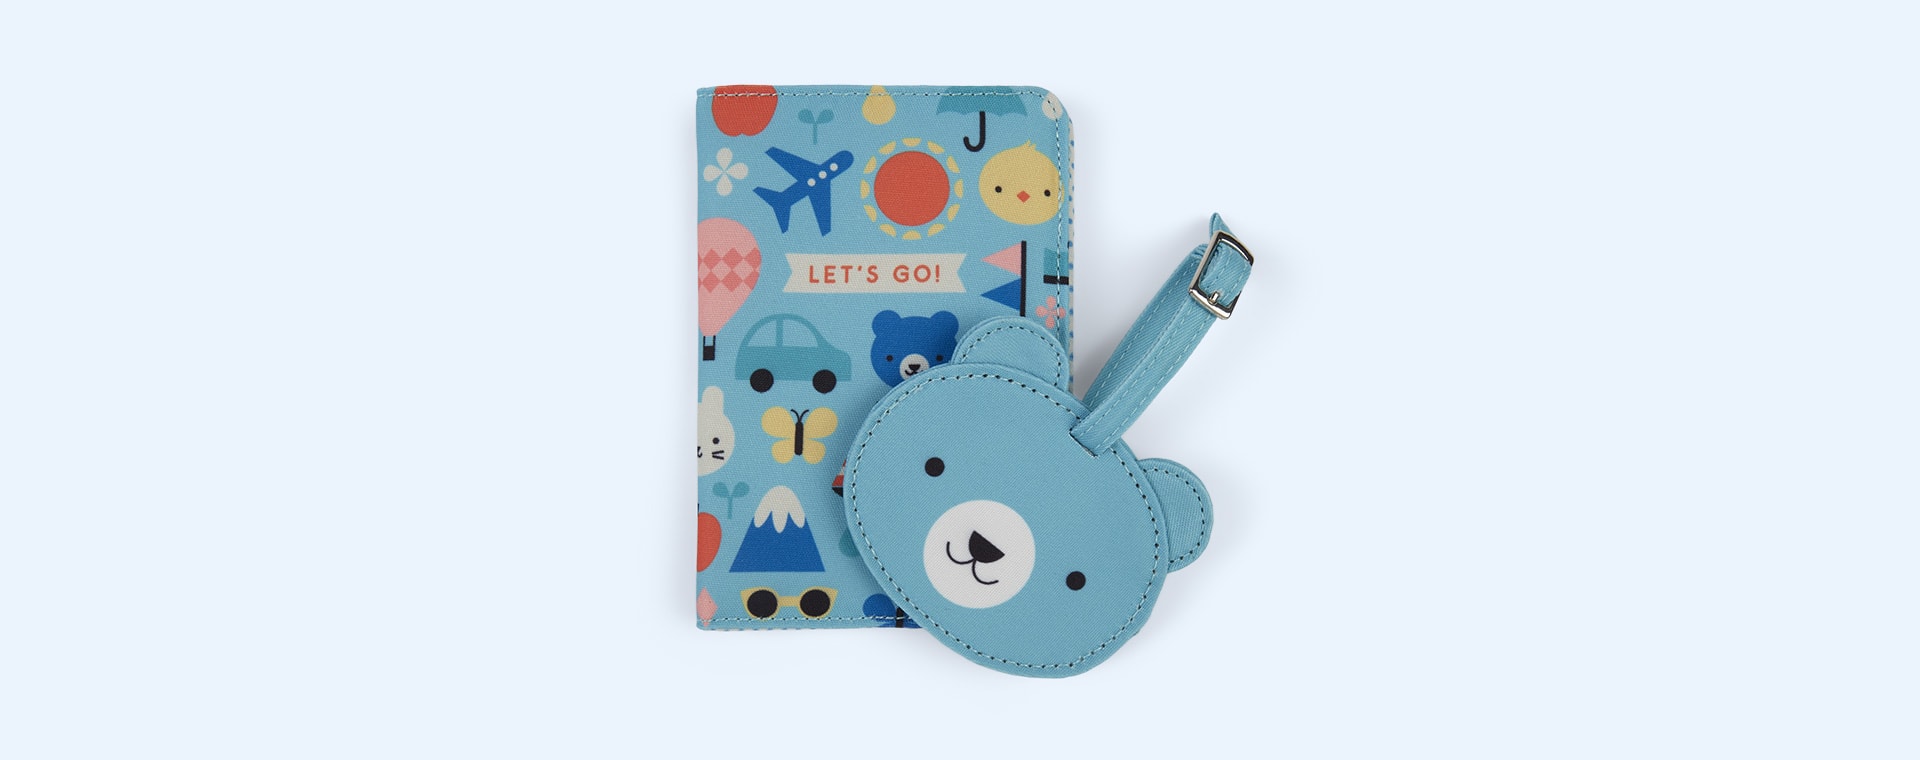 Multi Petit Collage Baby Passport Cover And Luggage Tag Travel Set